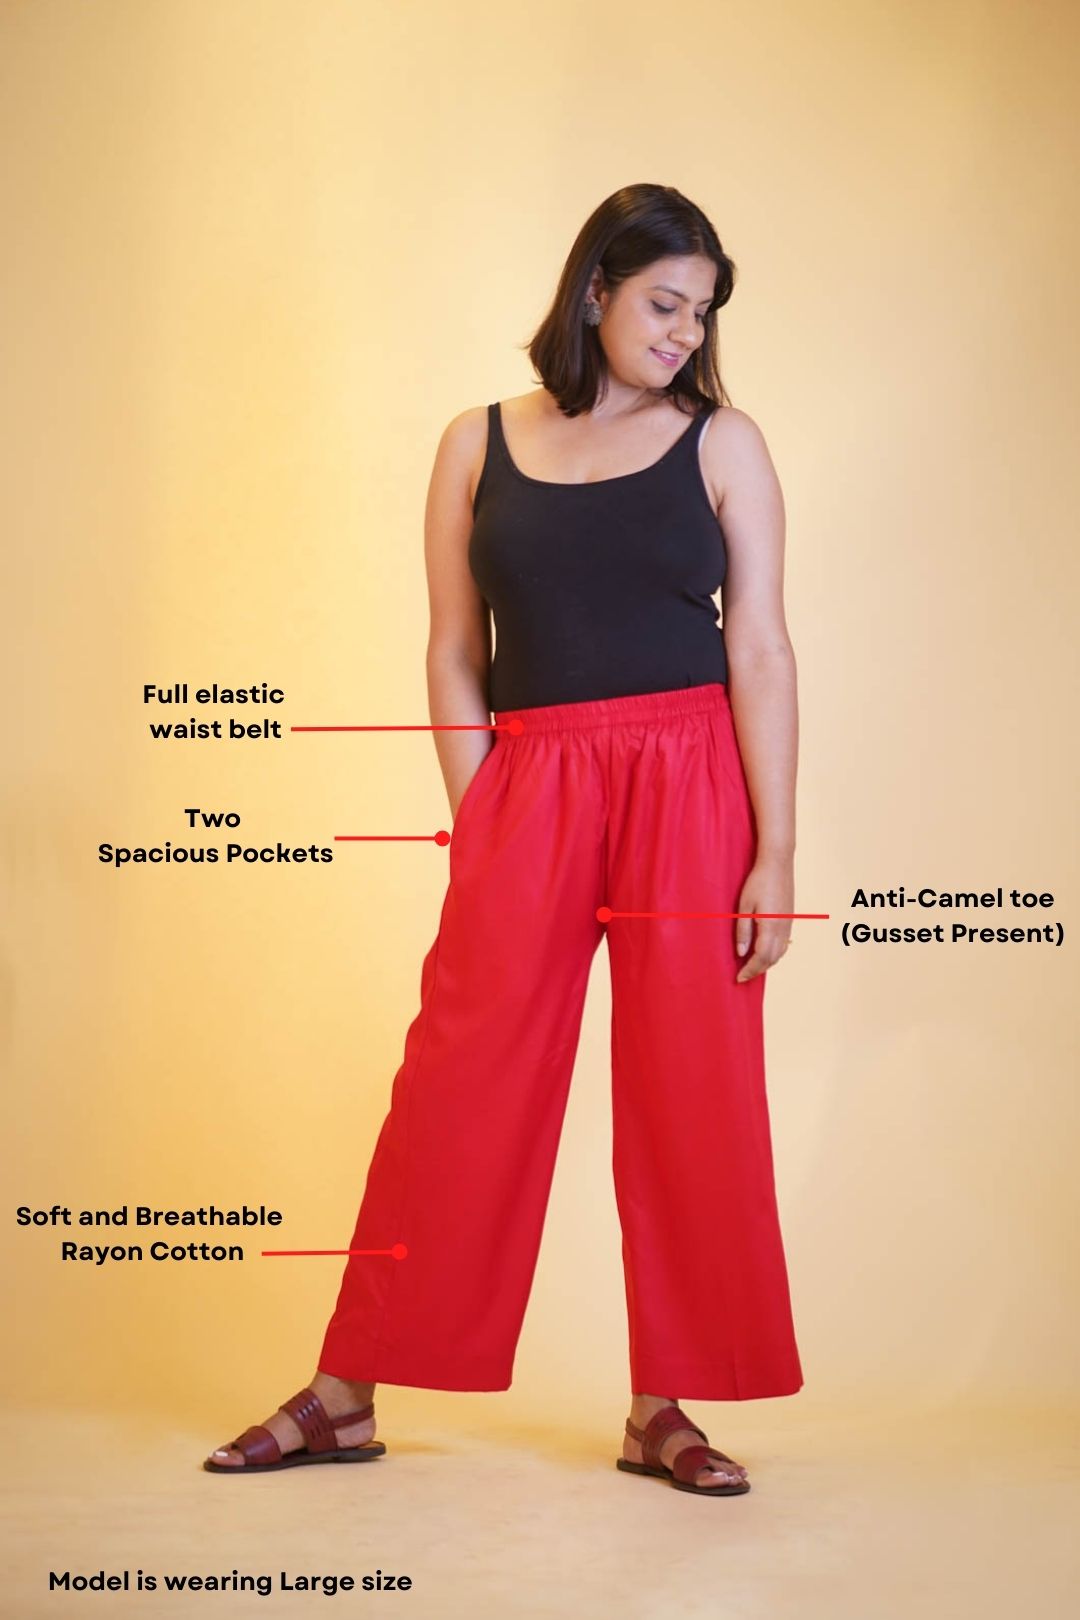 How to Wear Crop Tops and Palazzo Pants - Chiconomical